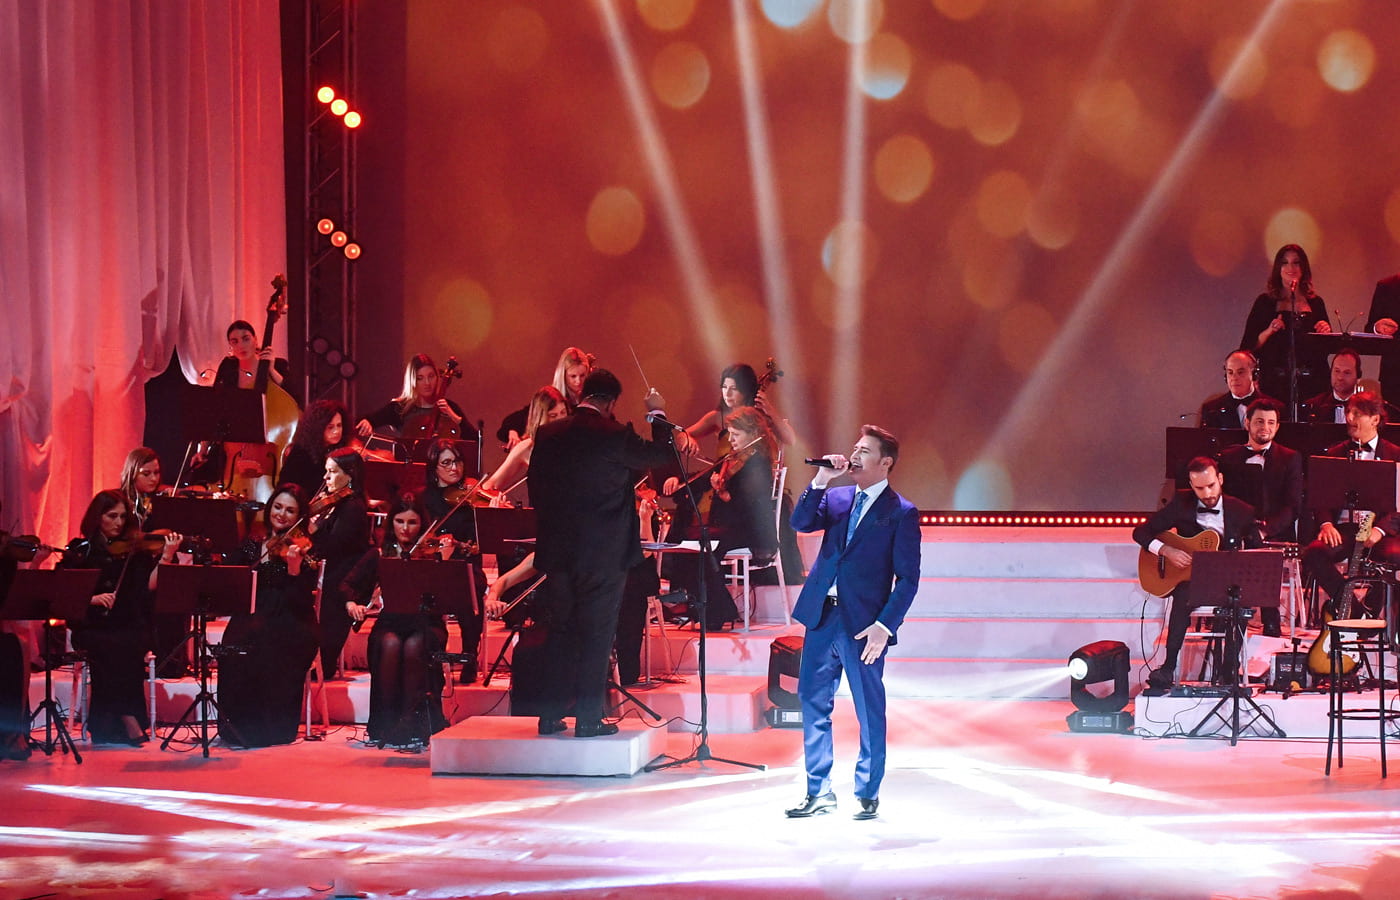 Pasquale Esposito singing on a glittering red stage.